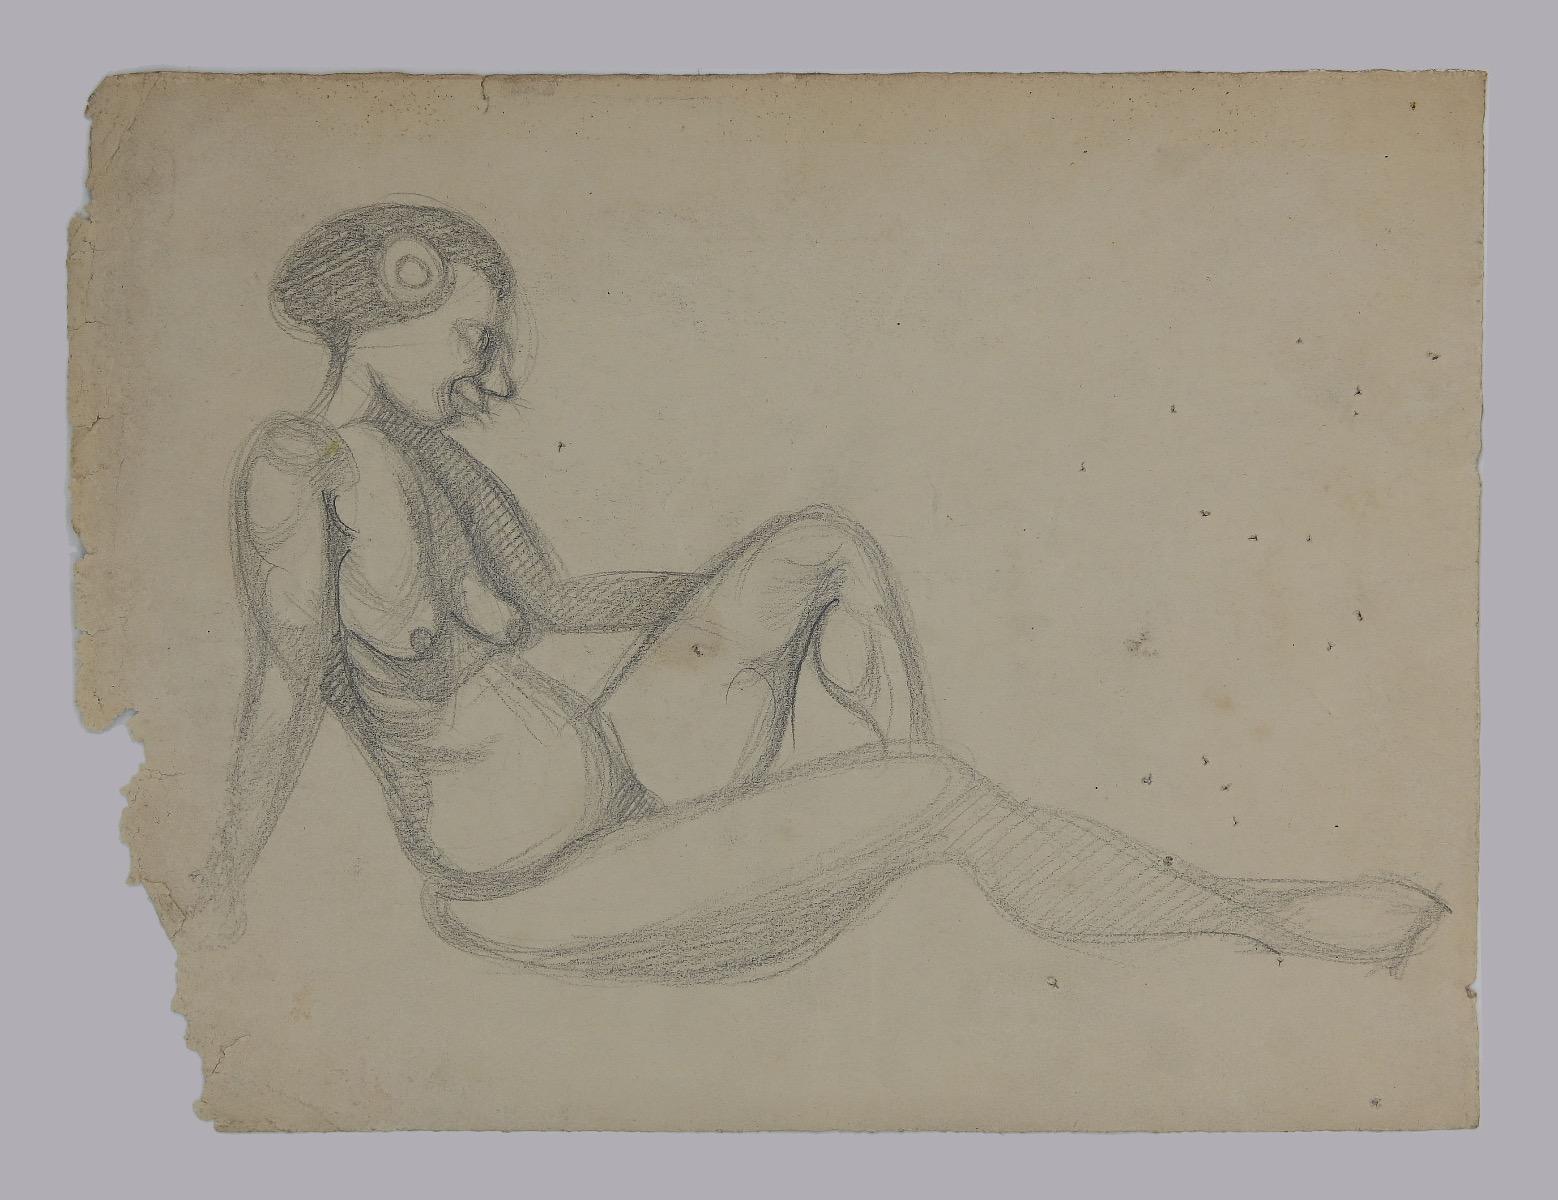 Naked woman is a pencil drawing by the artist André Meaux Saint-Marc (1885-1941).

Good conditions.